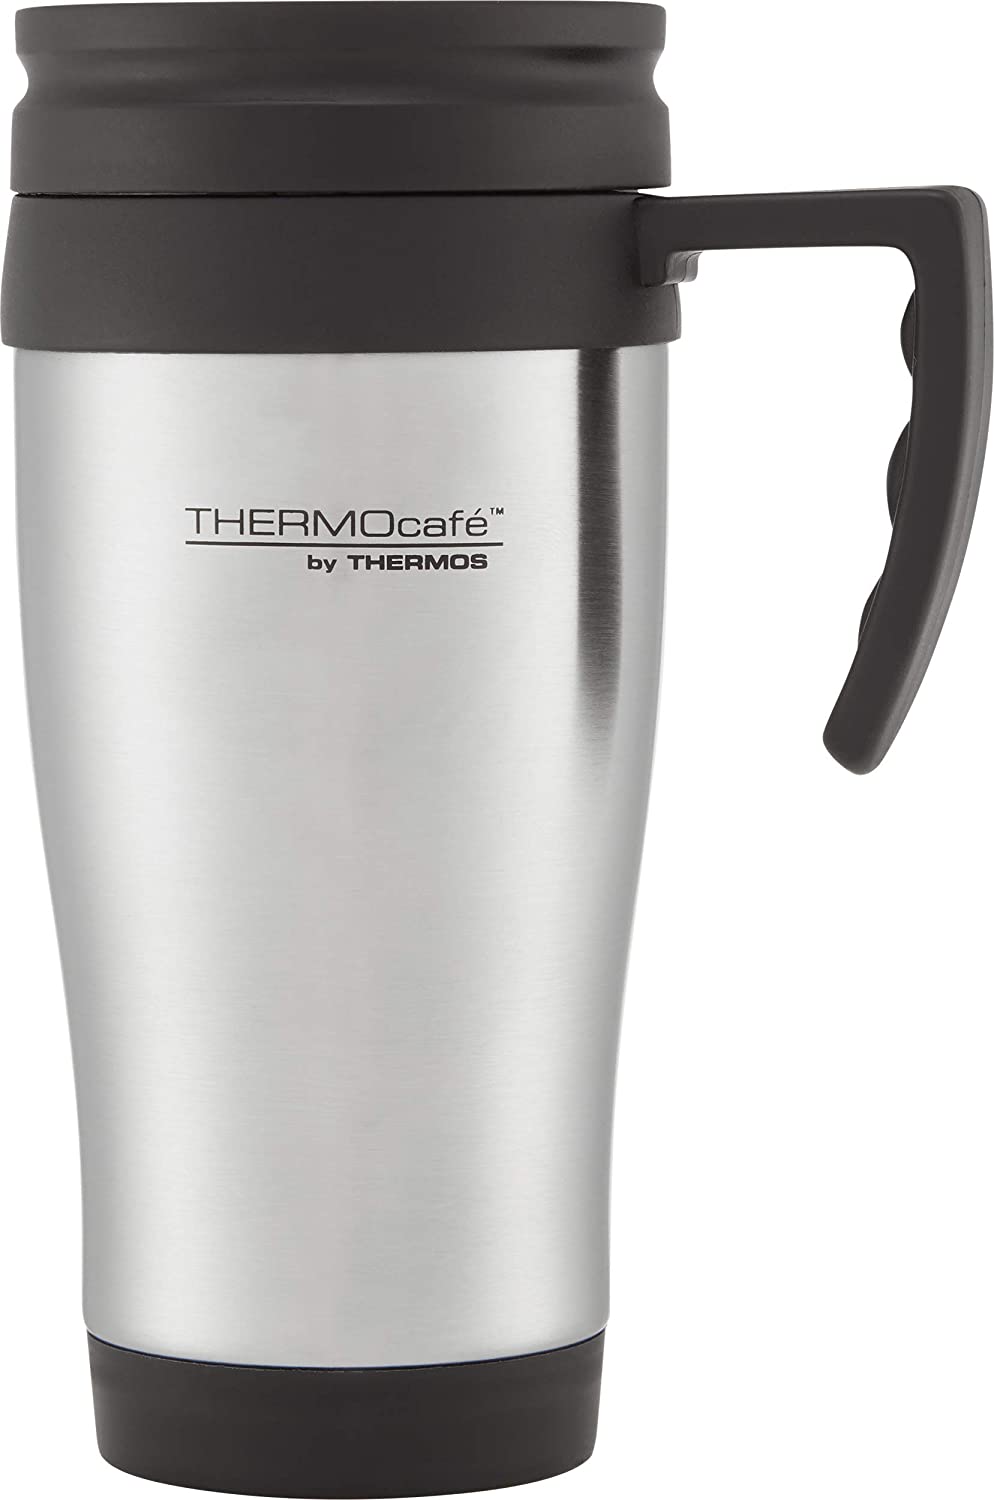 Thermos-Thermo-Cafe-Stainless-Steel-Travel-Mug-with-Slide-Lock-Lid-400ml